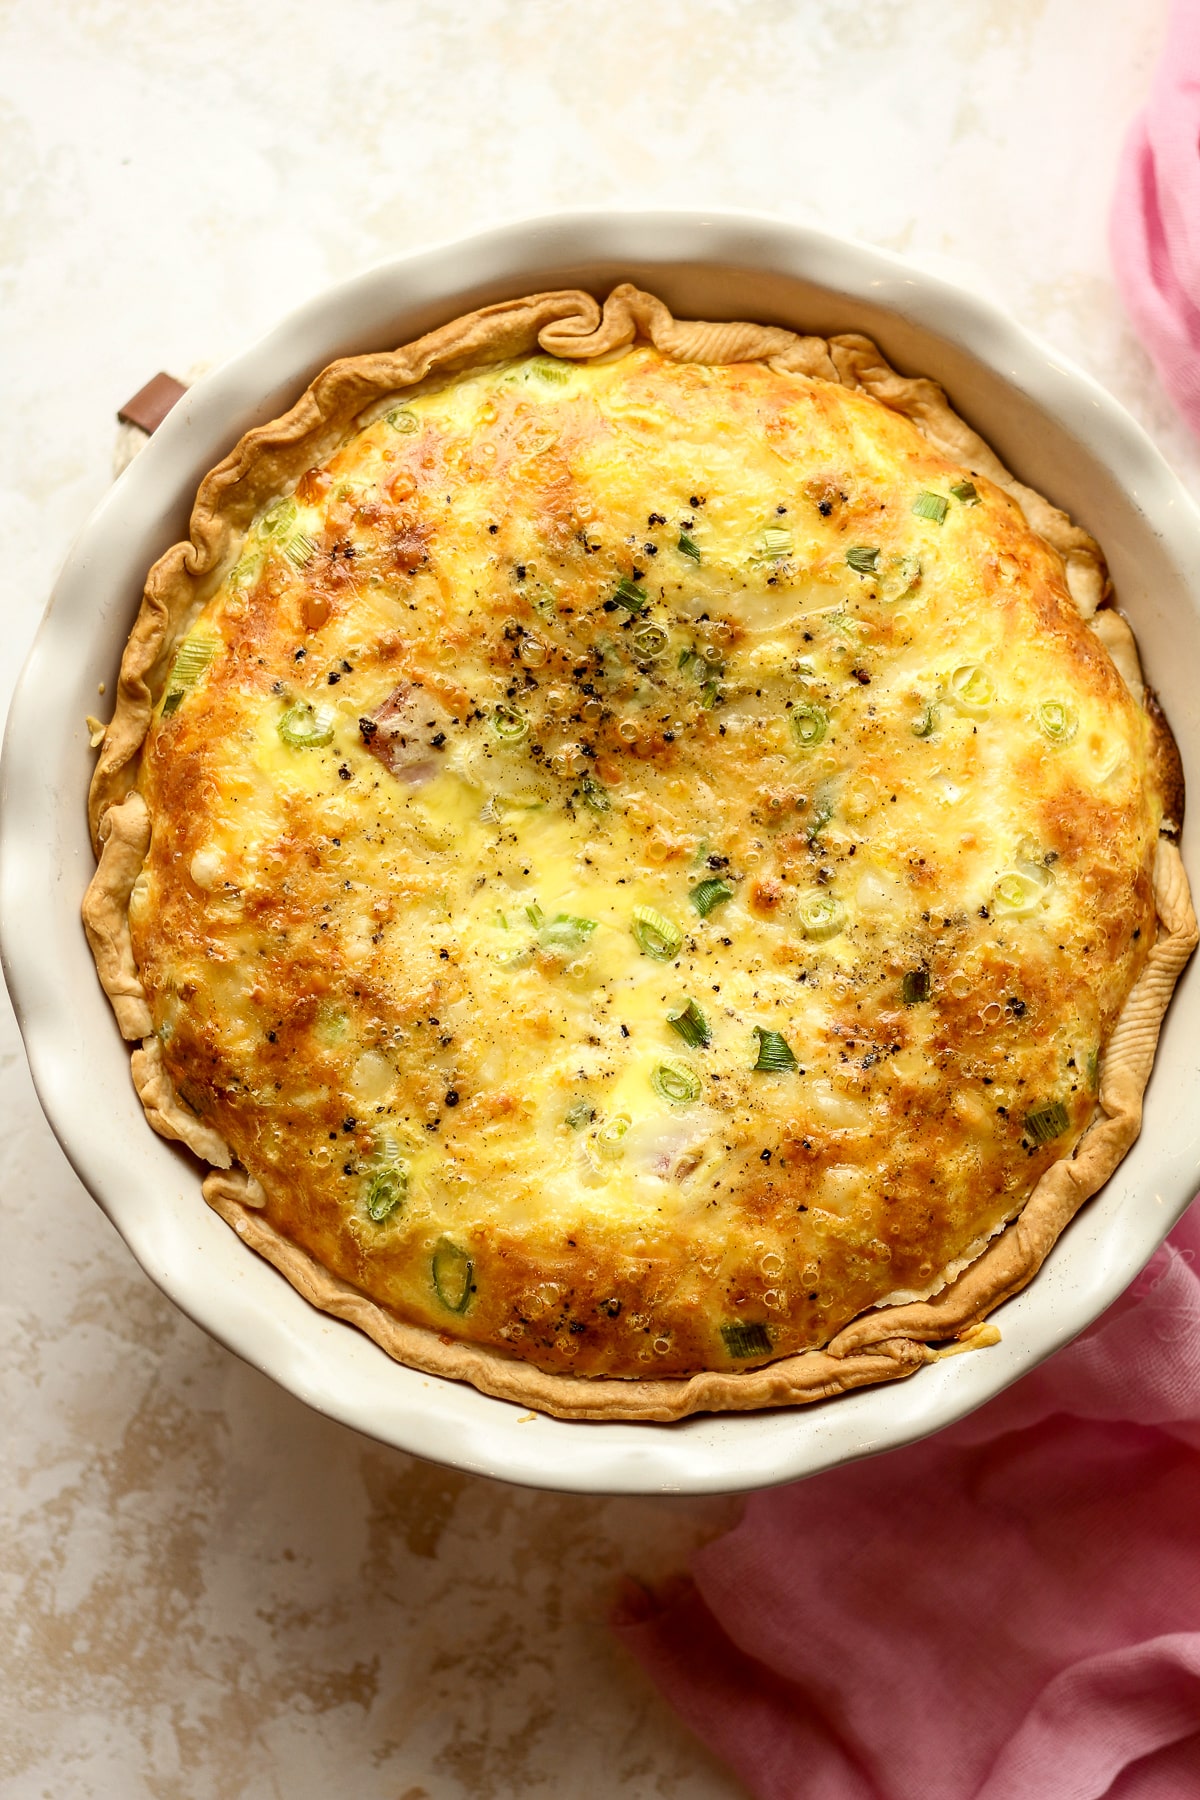 A baked ham and gruyere quiche in a pie plate.